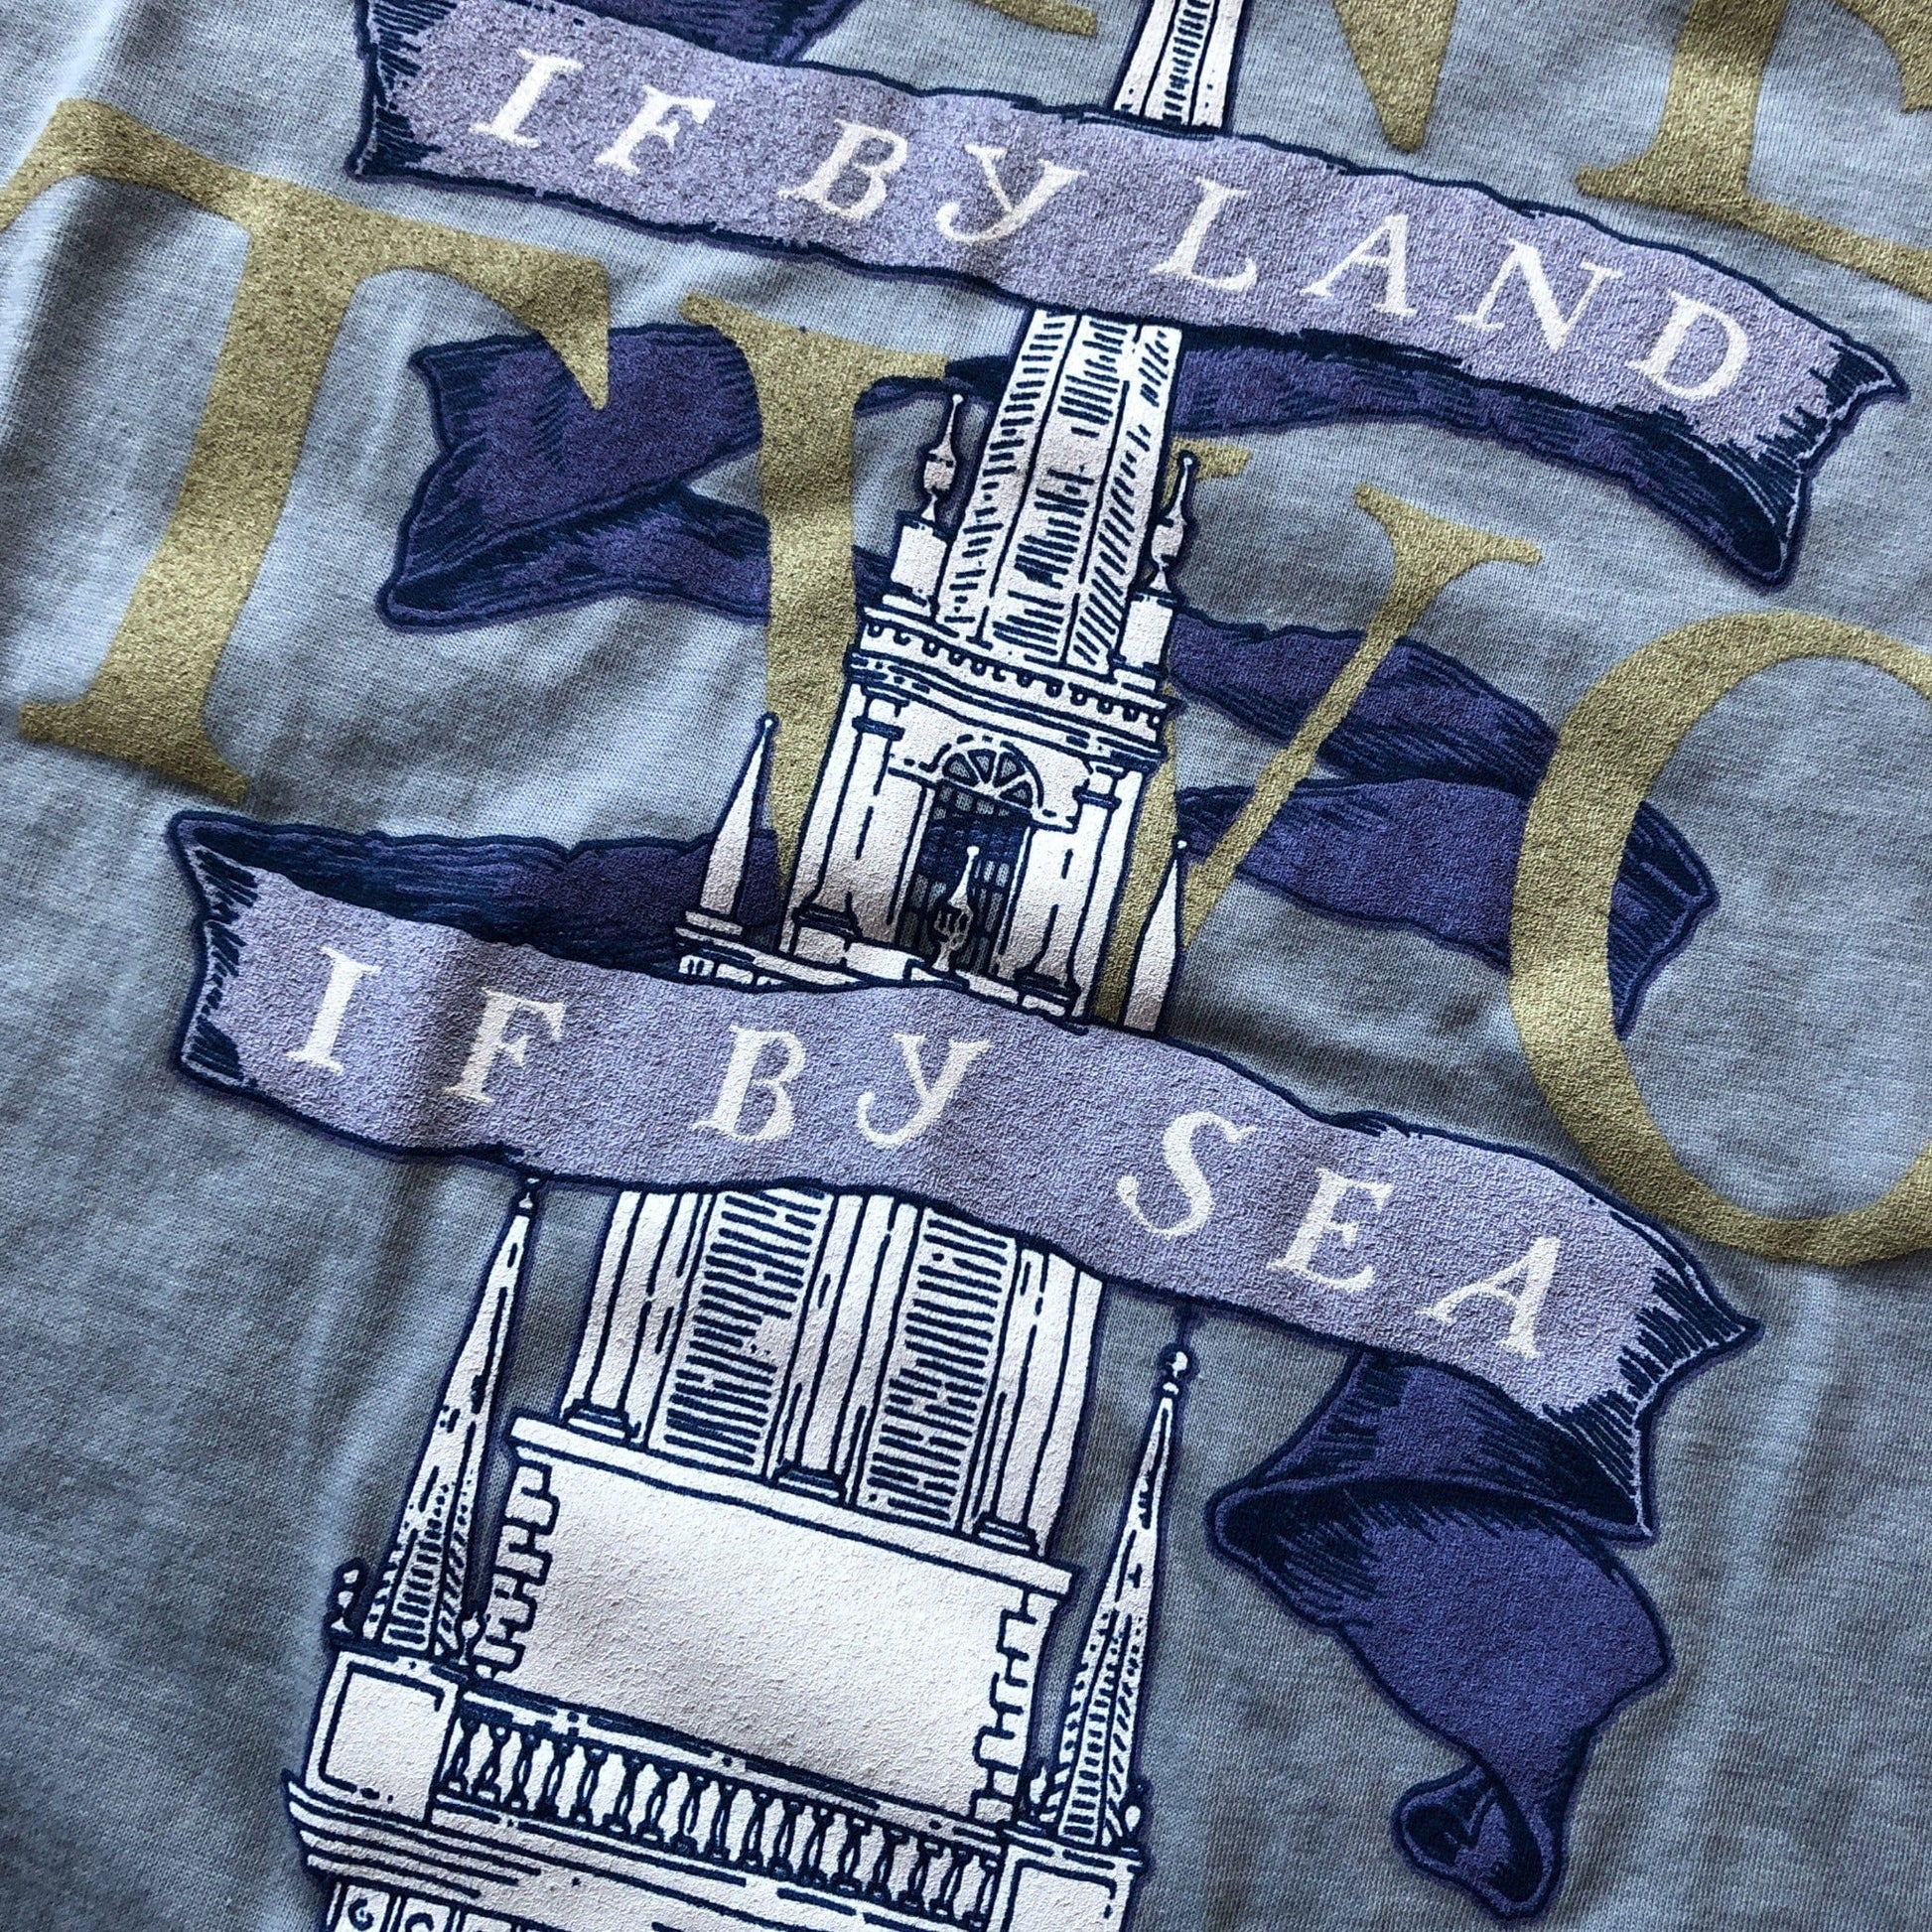 Close-up of "One if by land . . ." Old North Special Edition Shirt from the history list store